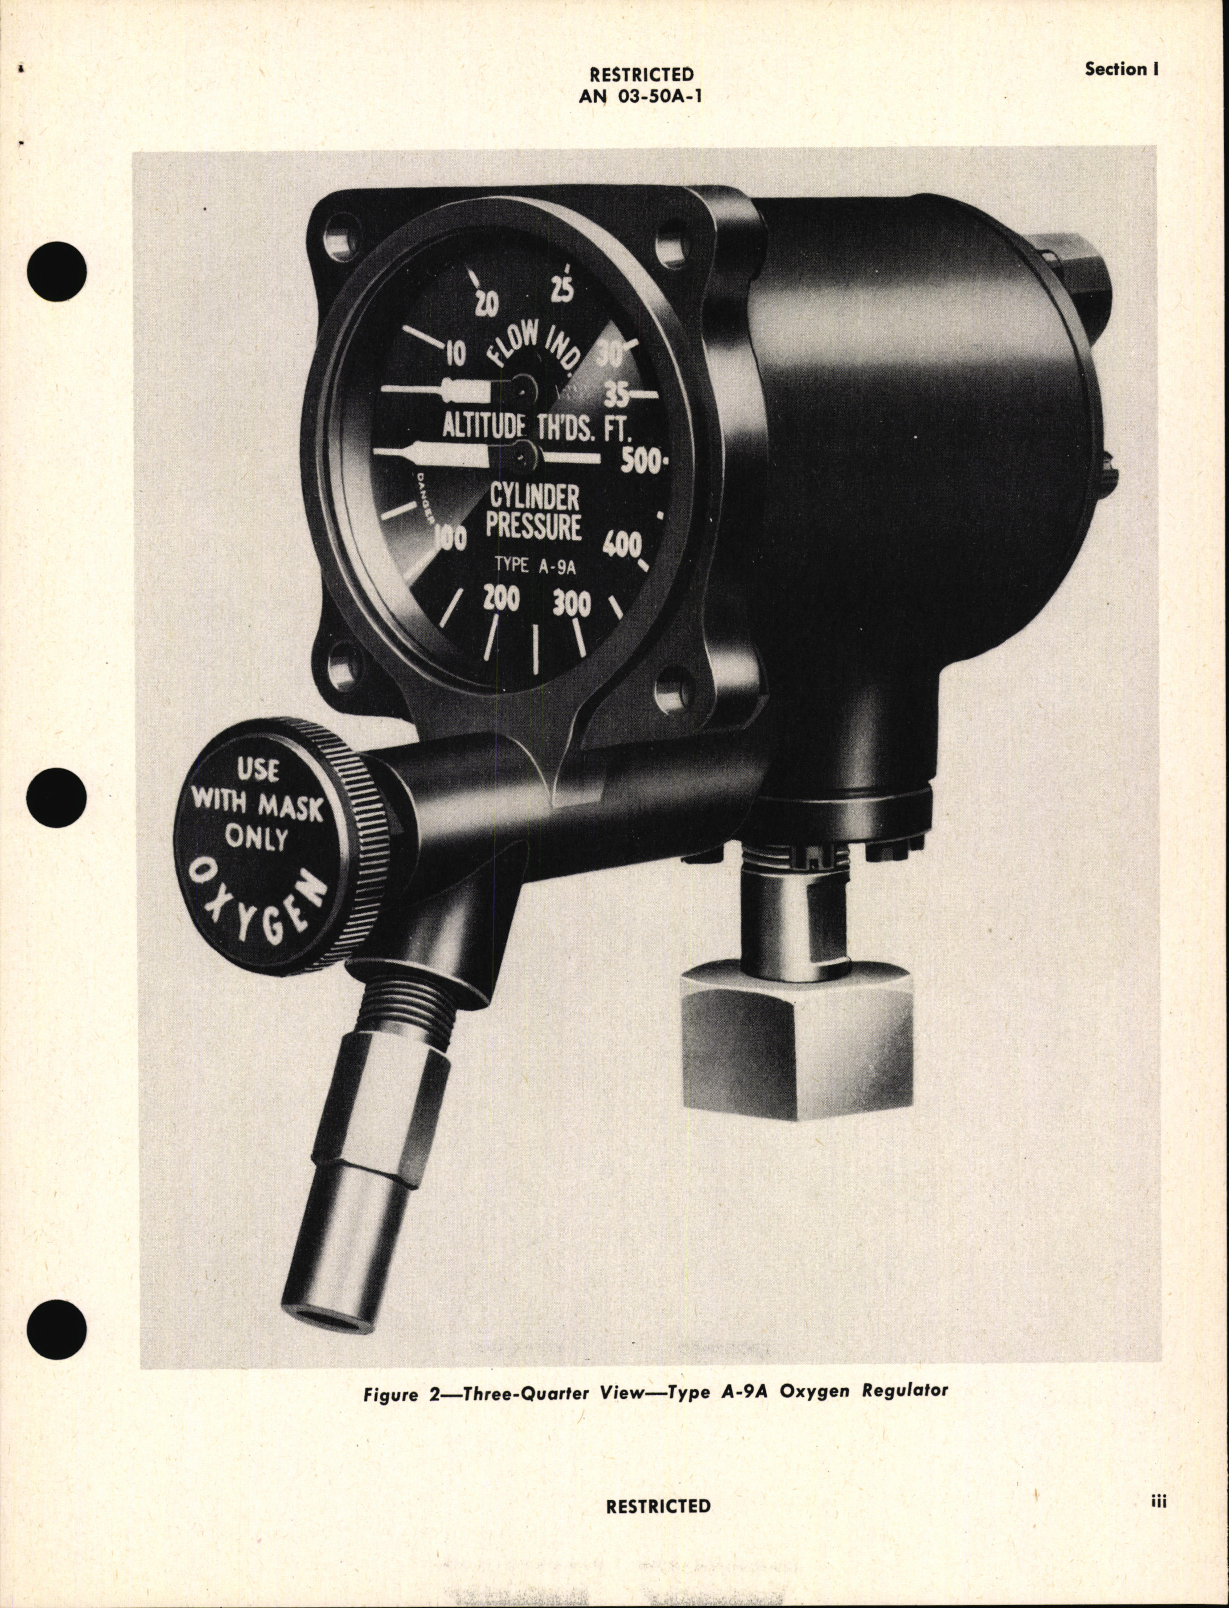 Sample page 5 from AirCorps Library document: Handbook of Instructions with Parts Catalog for Oxygen Regulators